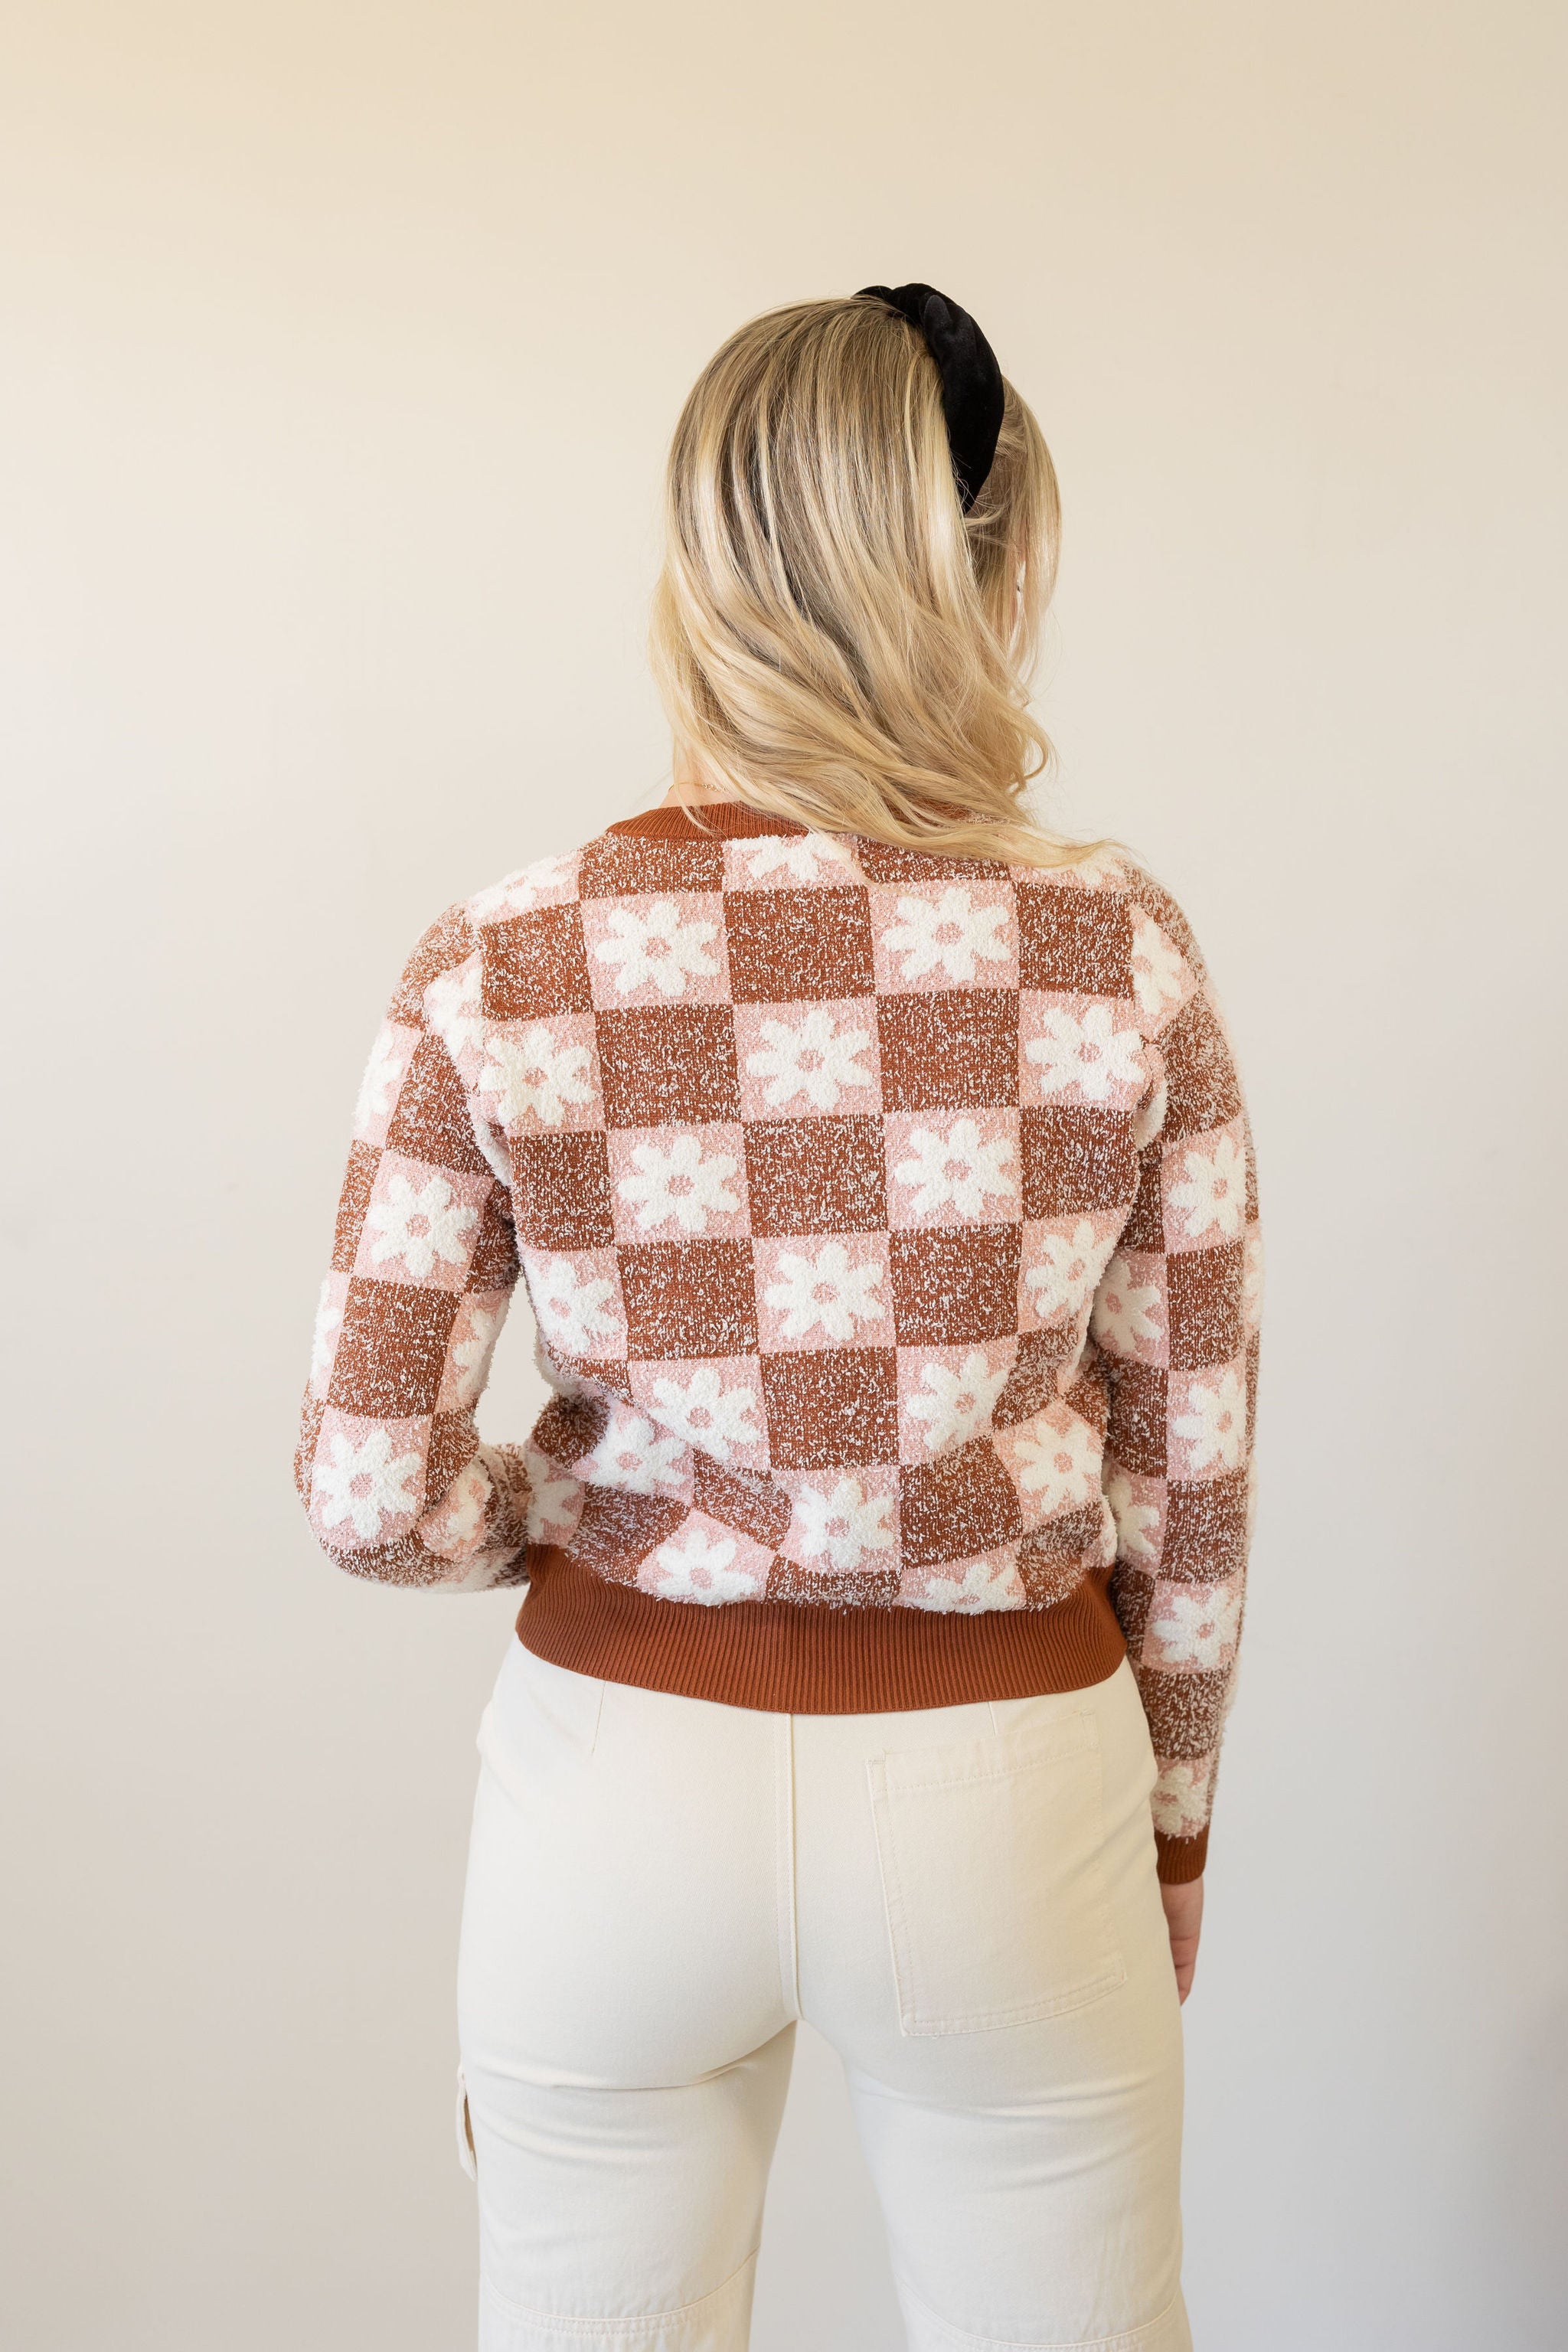 Find Me Checkered Floral Cardigan by For Good